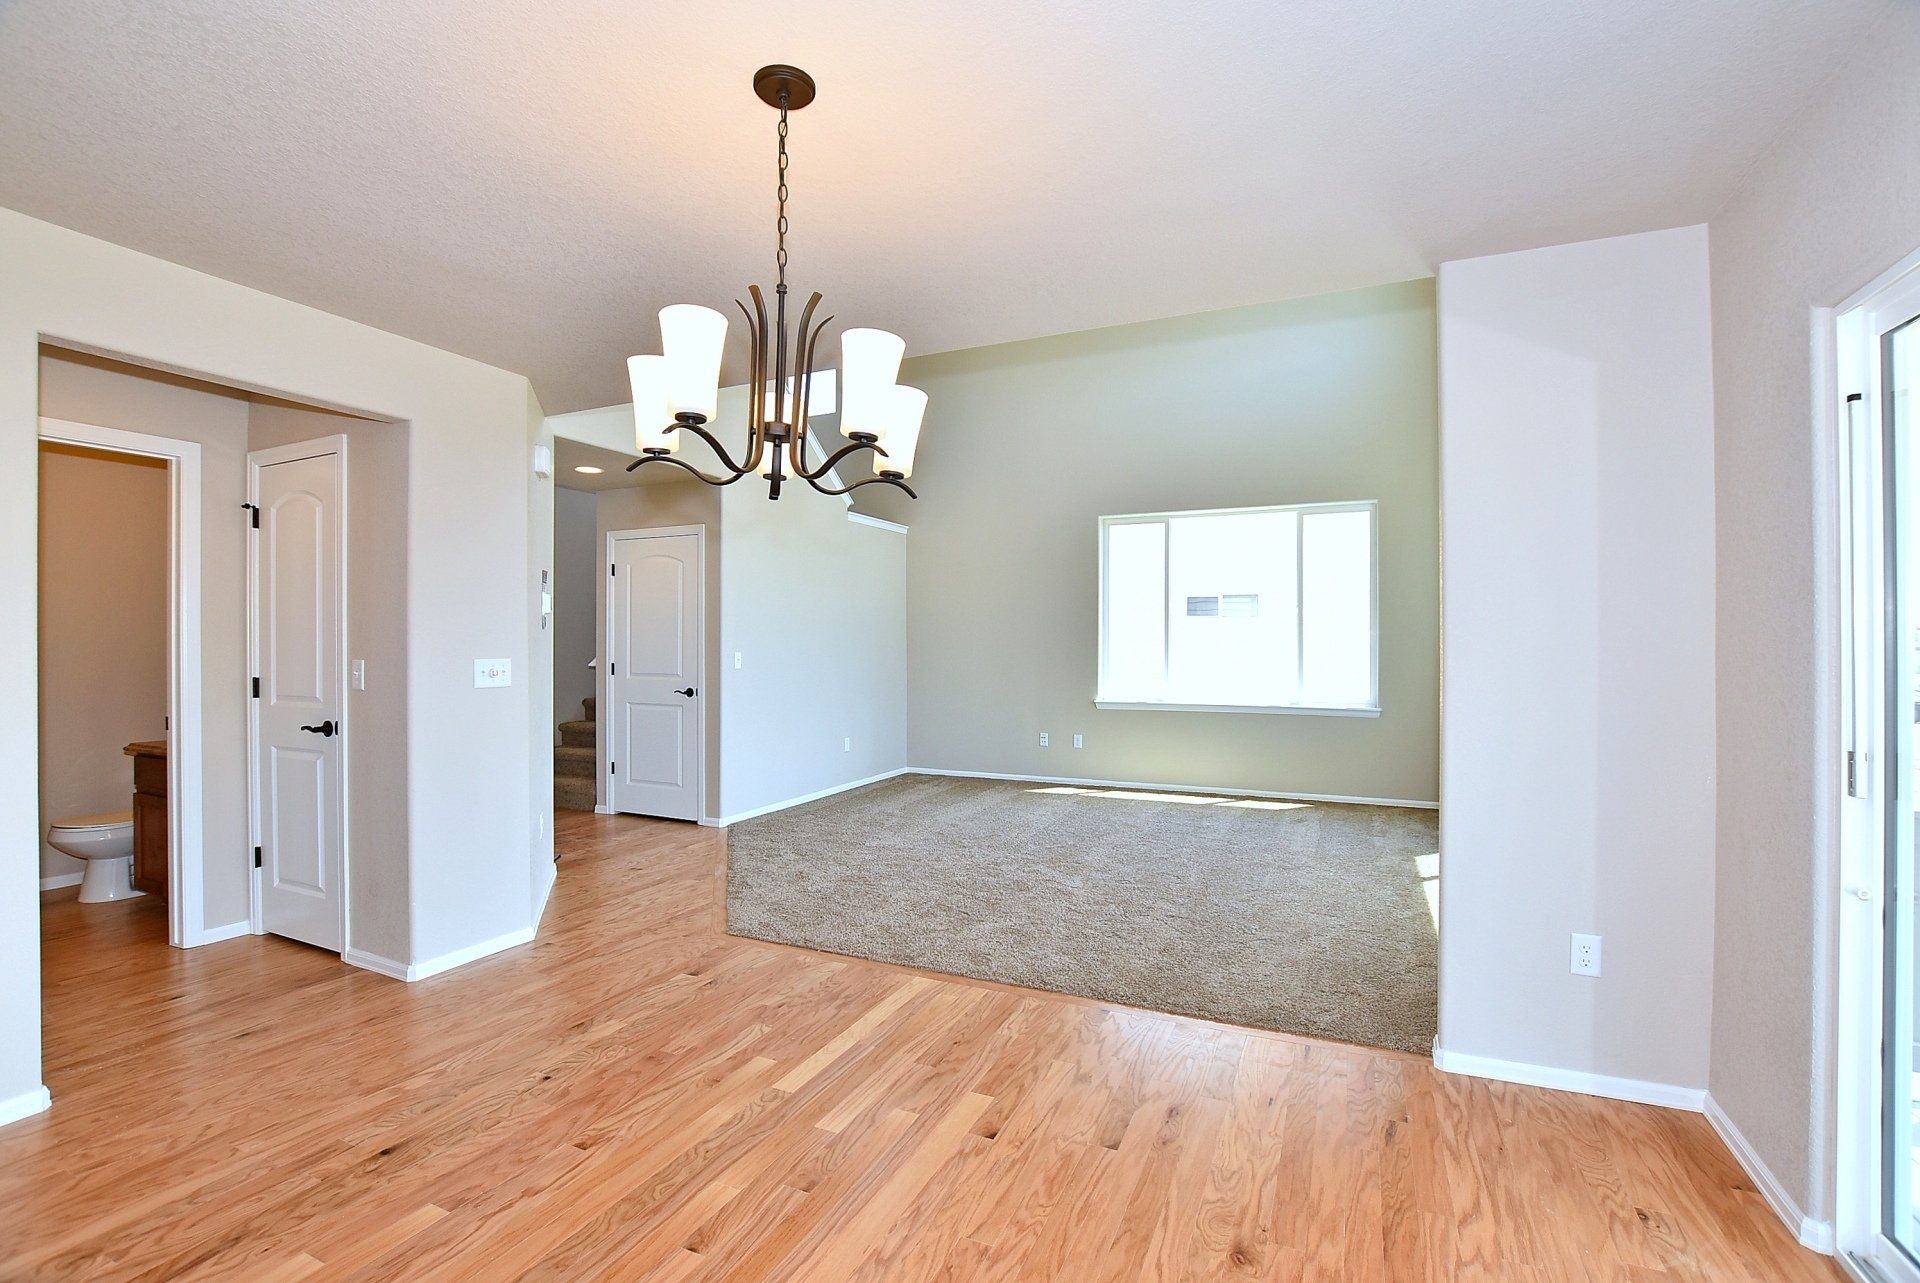 Large room with wooden floors